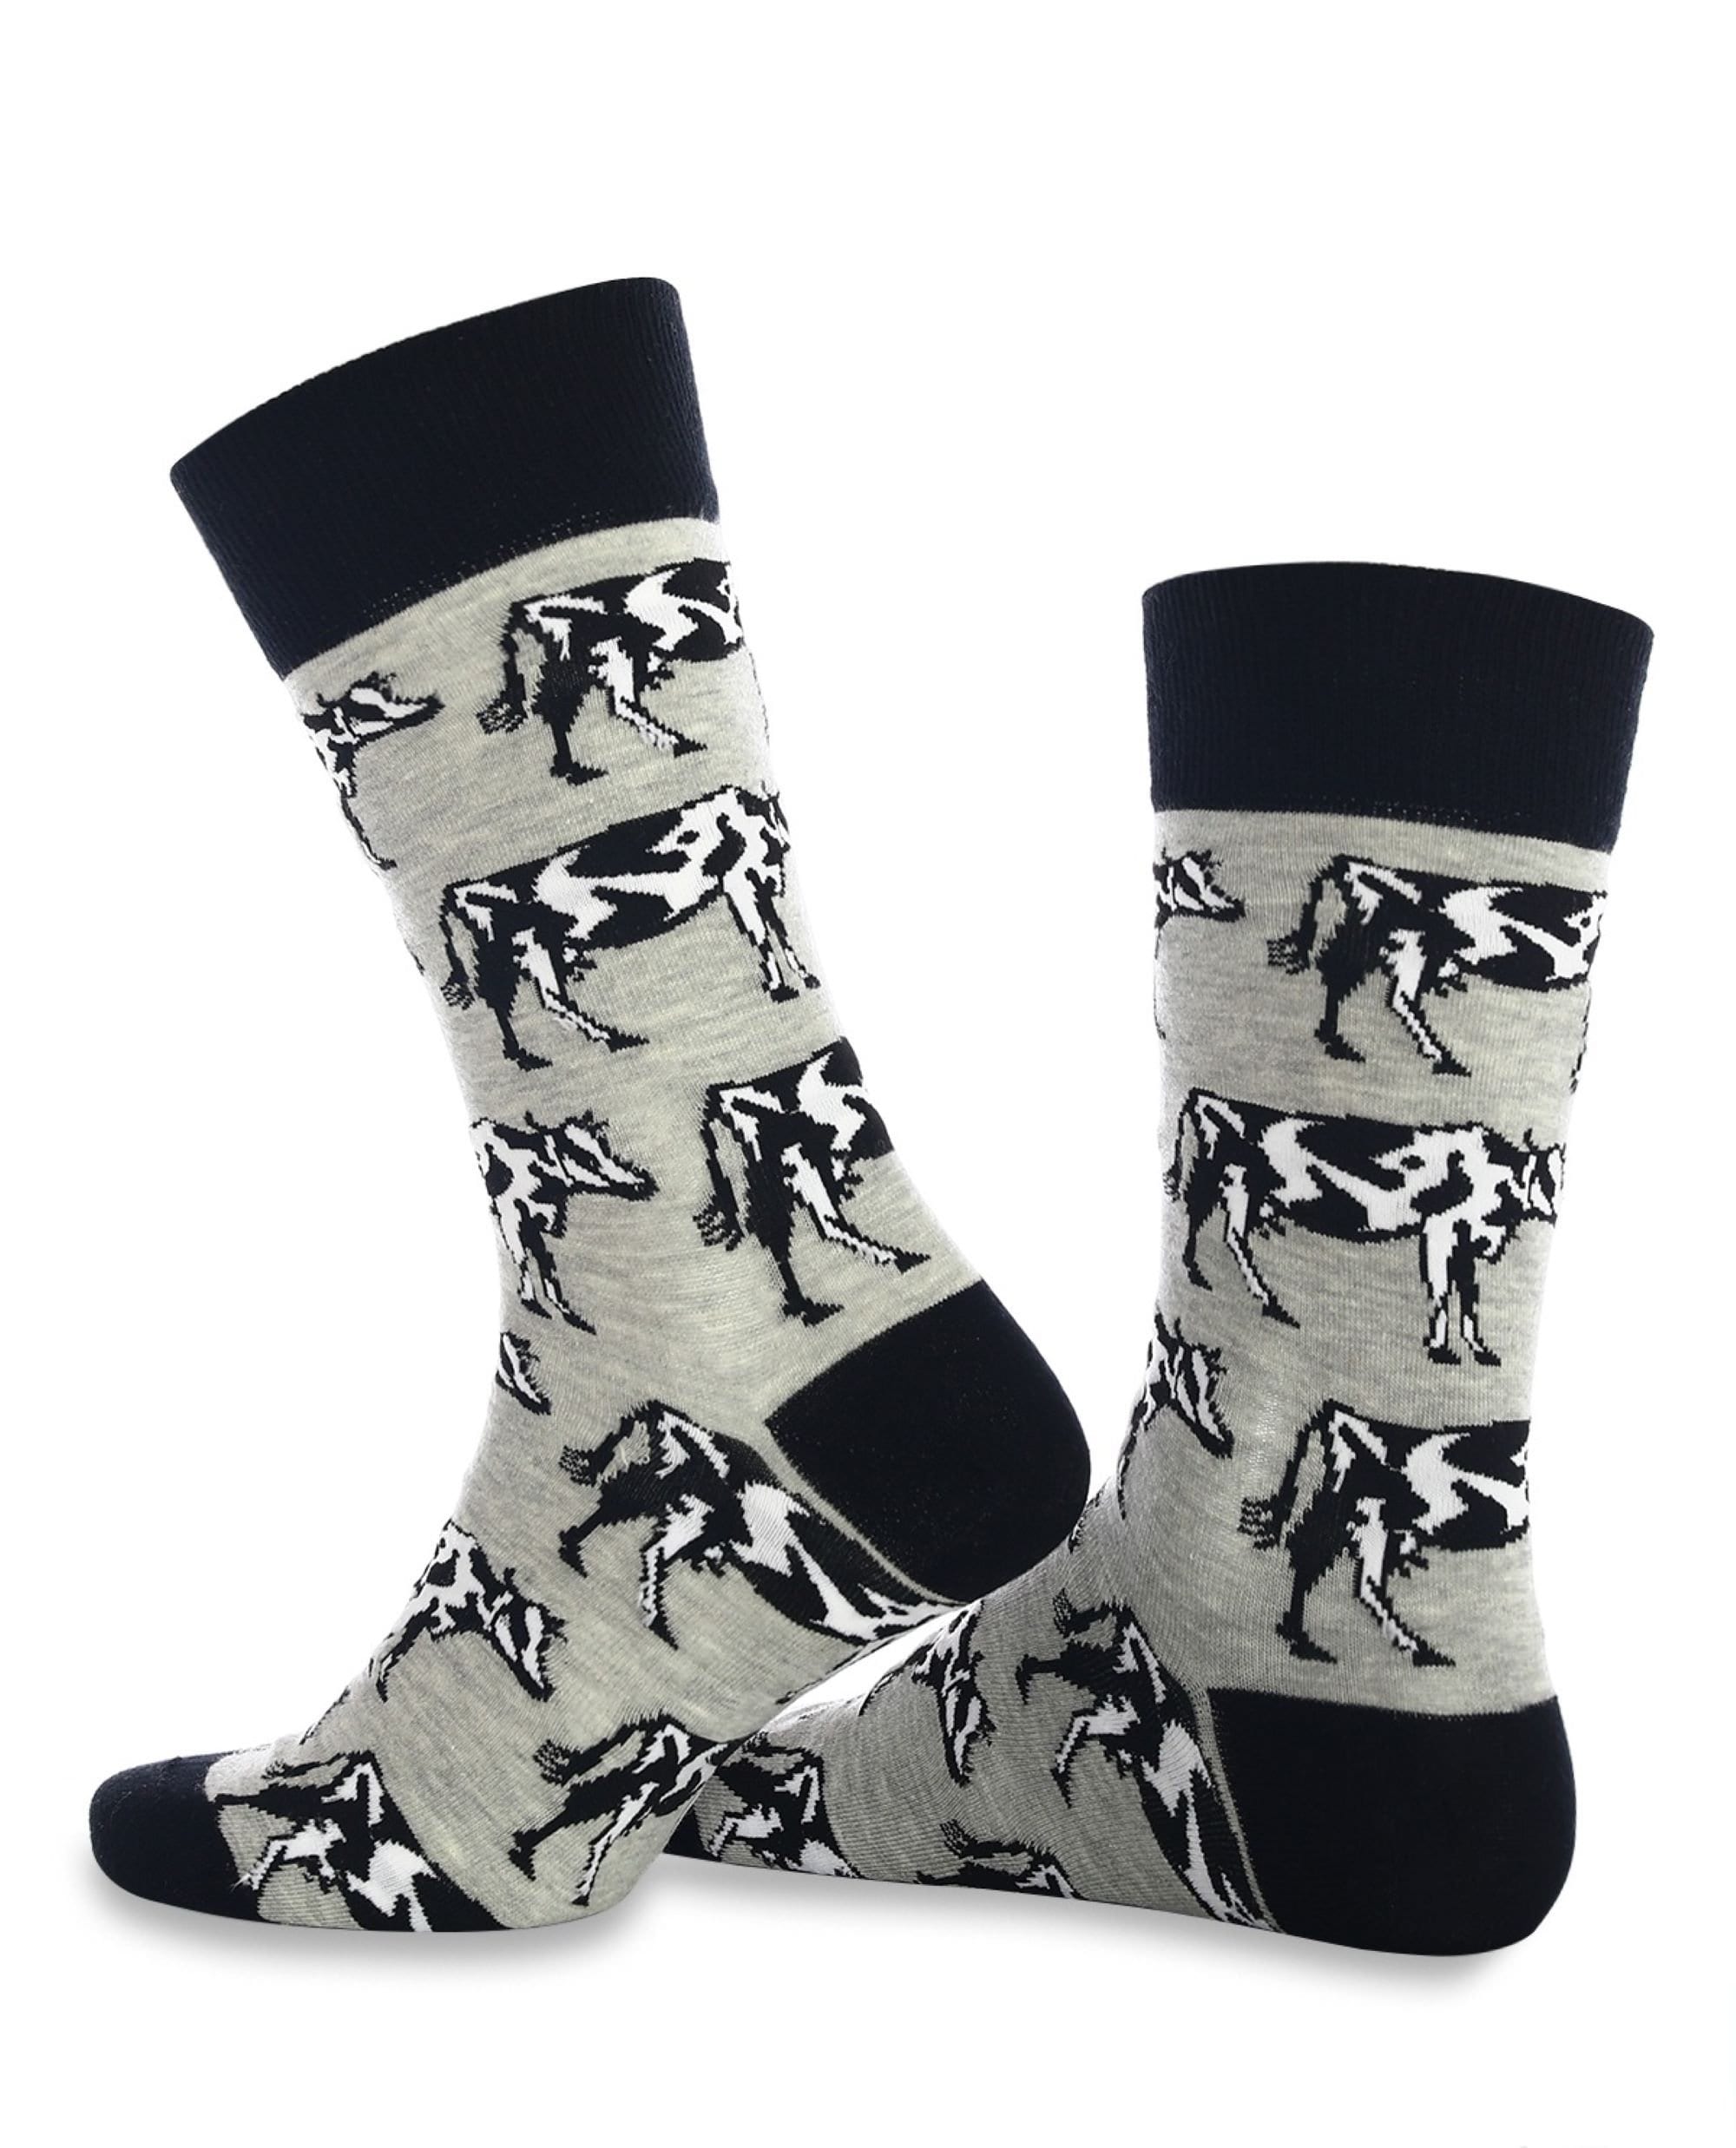 Cow Mens Cotton Socks | Gift Idea Novelty Funky Cool Funny UK Size 7-12